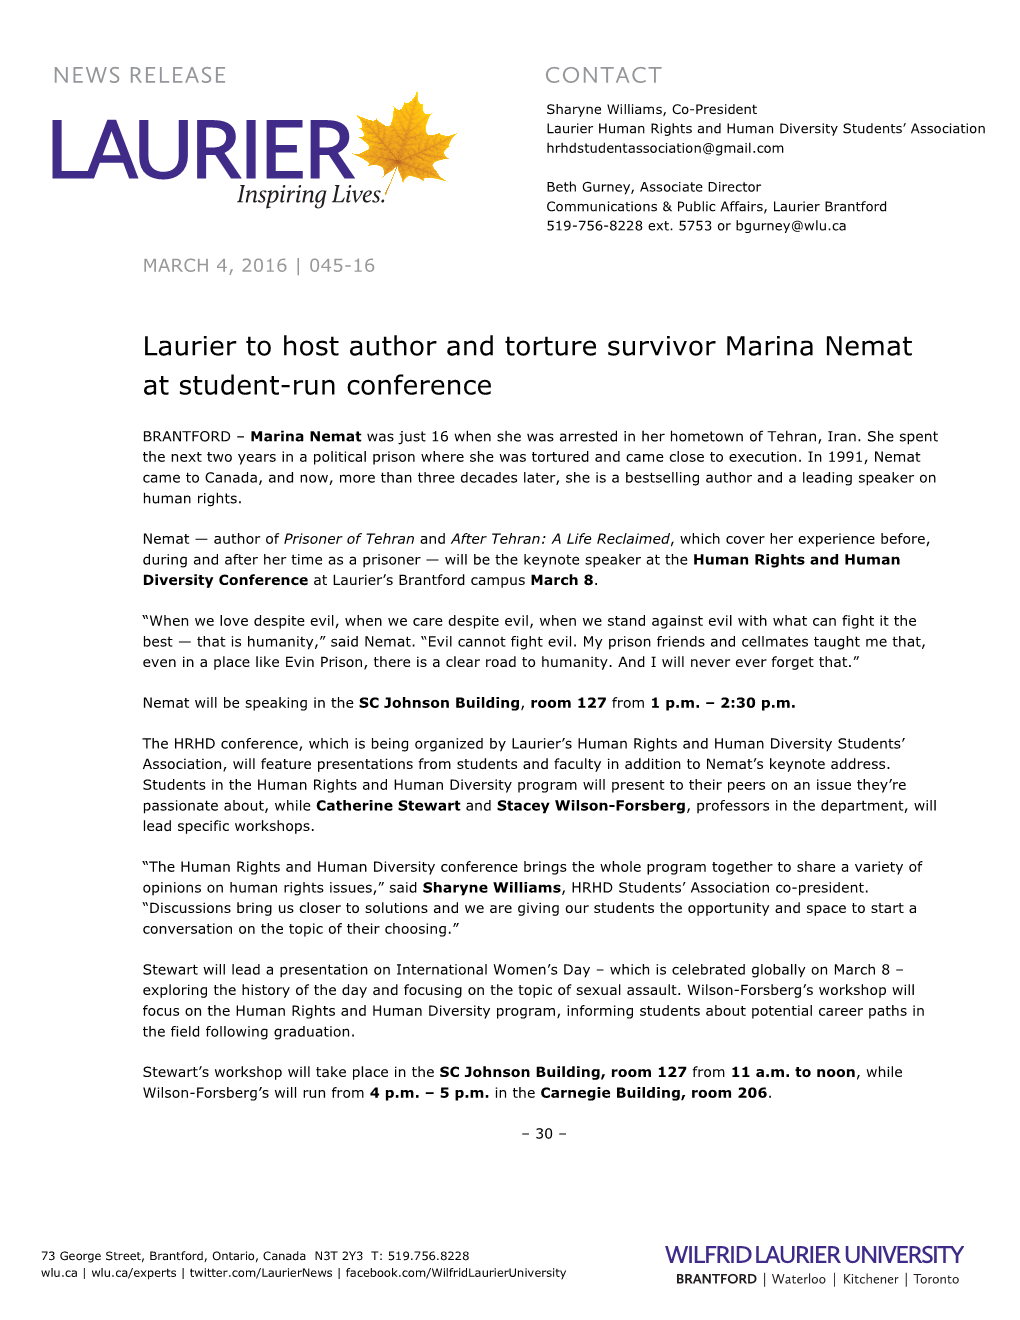 Laurier to Host Author and Torture Survivor Marina Nemat at Student-Run Conference